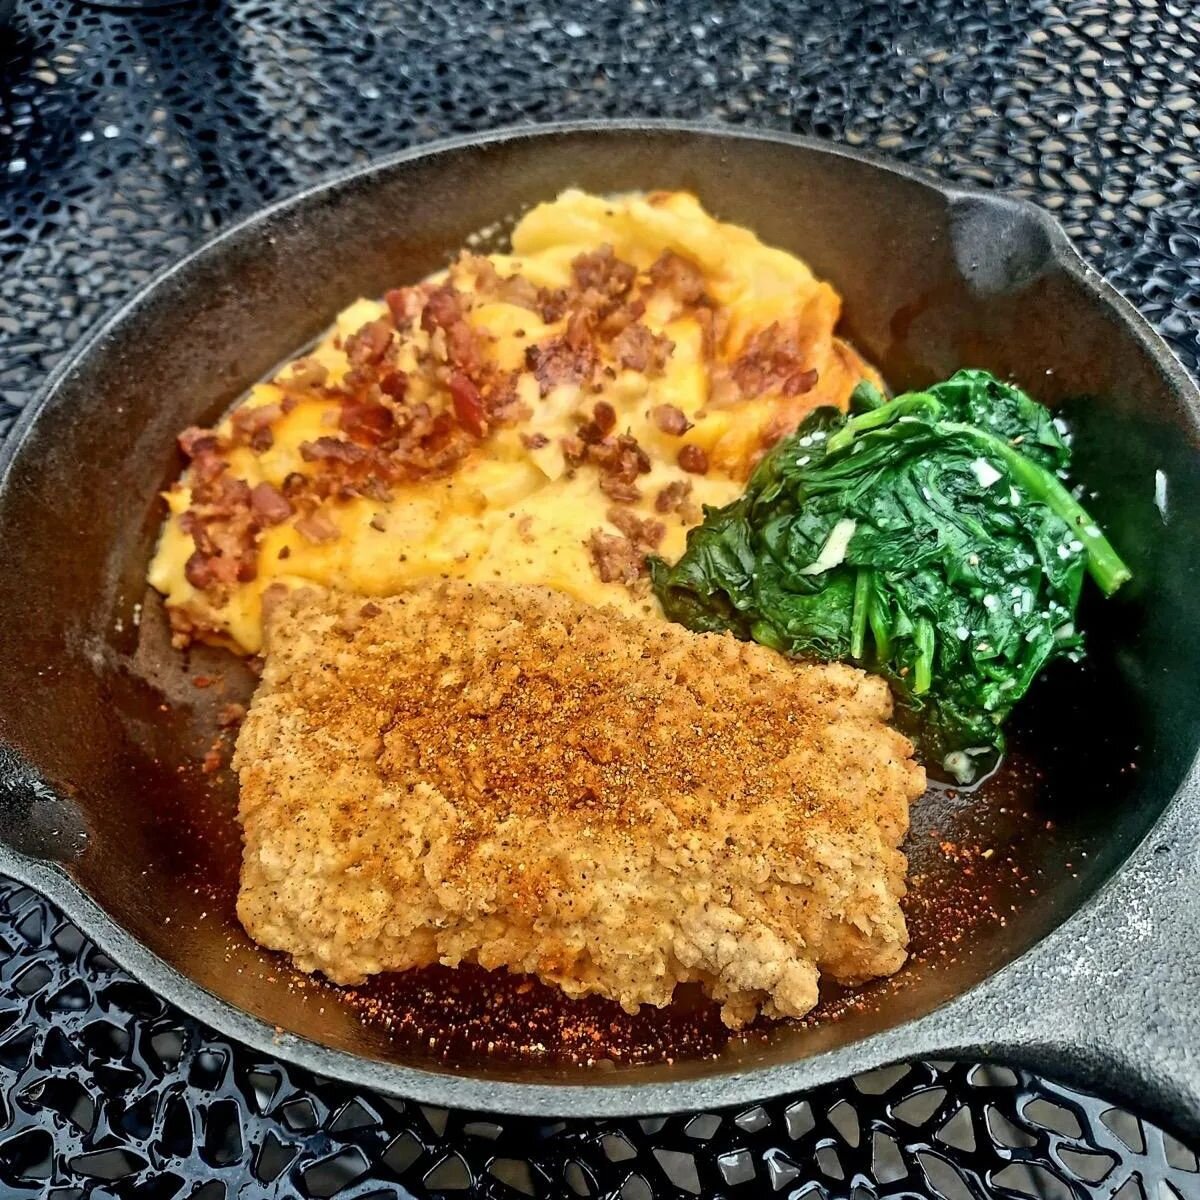 Swing by for Wednesday dinner!! (4-10p) 5402082855

Drink of the day- 
&bull;Spiced Carribean mule

Features-
&bull;Old bay Fried cod skillet w/ loaded au gratin potatoes &amp; saut&eacute;ed spinach. $18

Soup- 
&bull;Sausage, white bean, &amp; okra